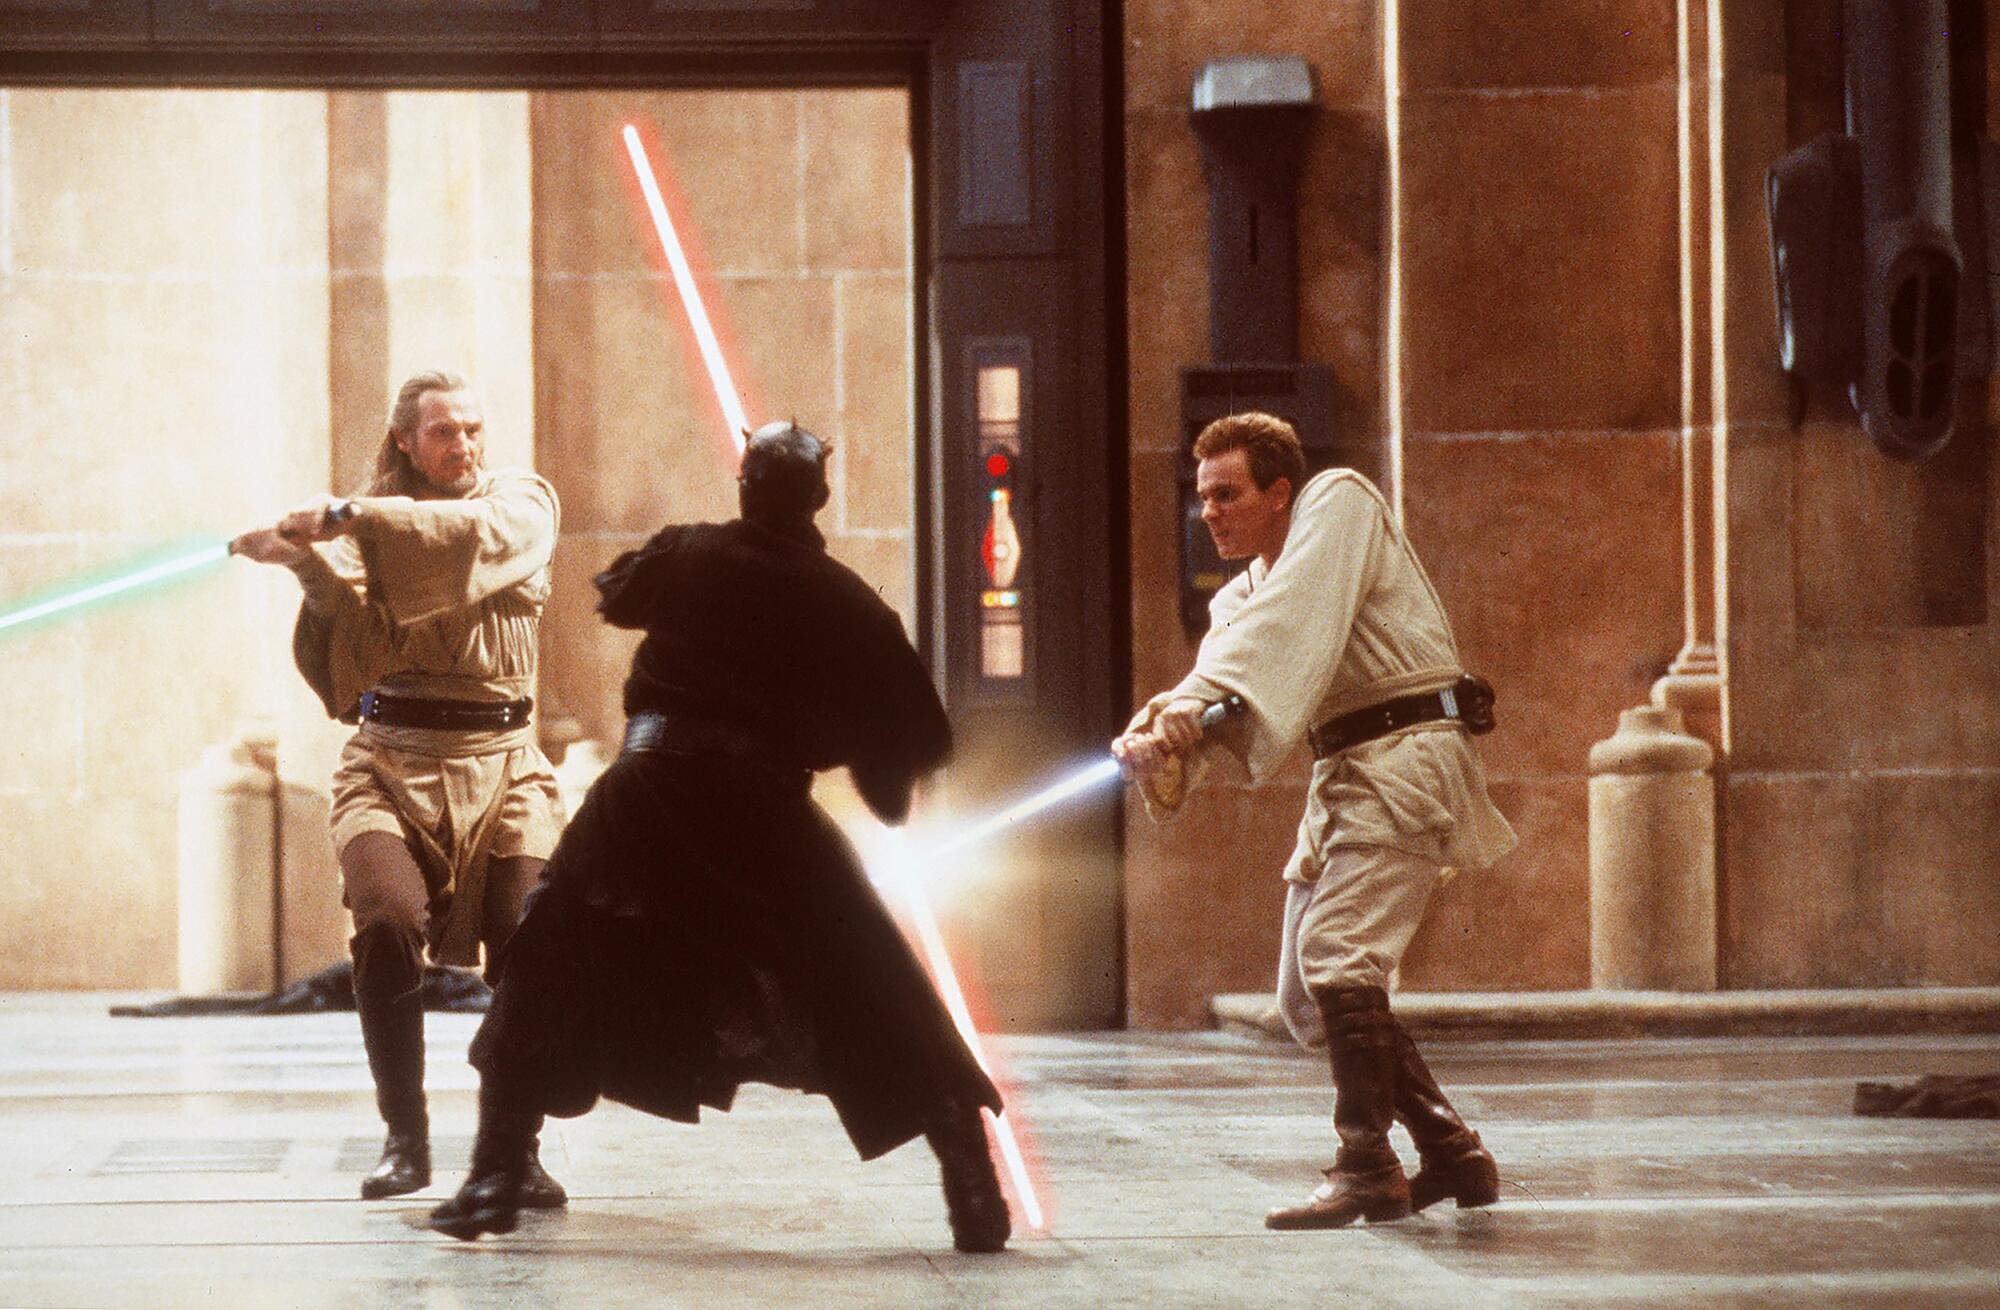 Three warriors engage in a lightsaber duel.